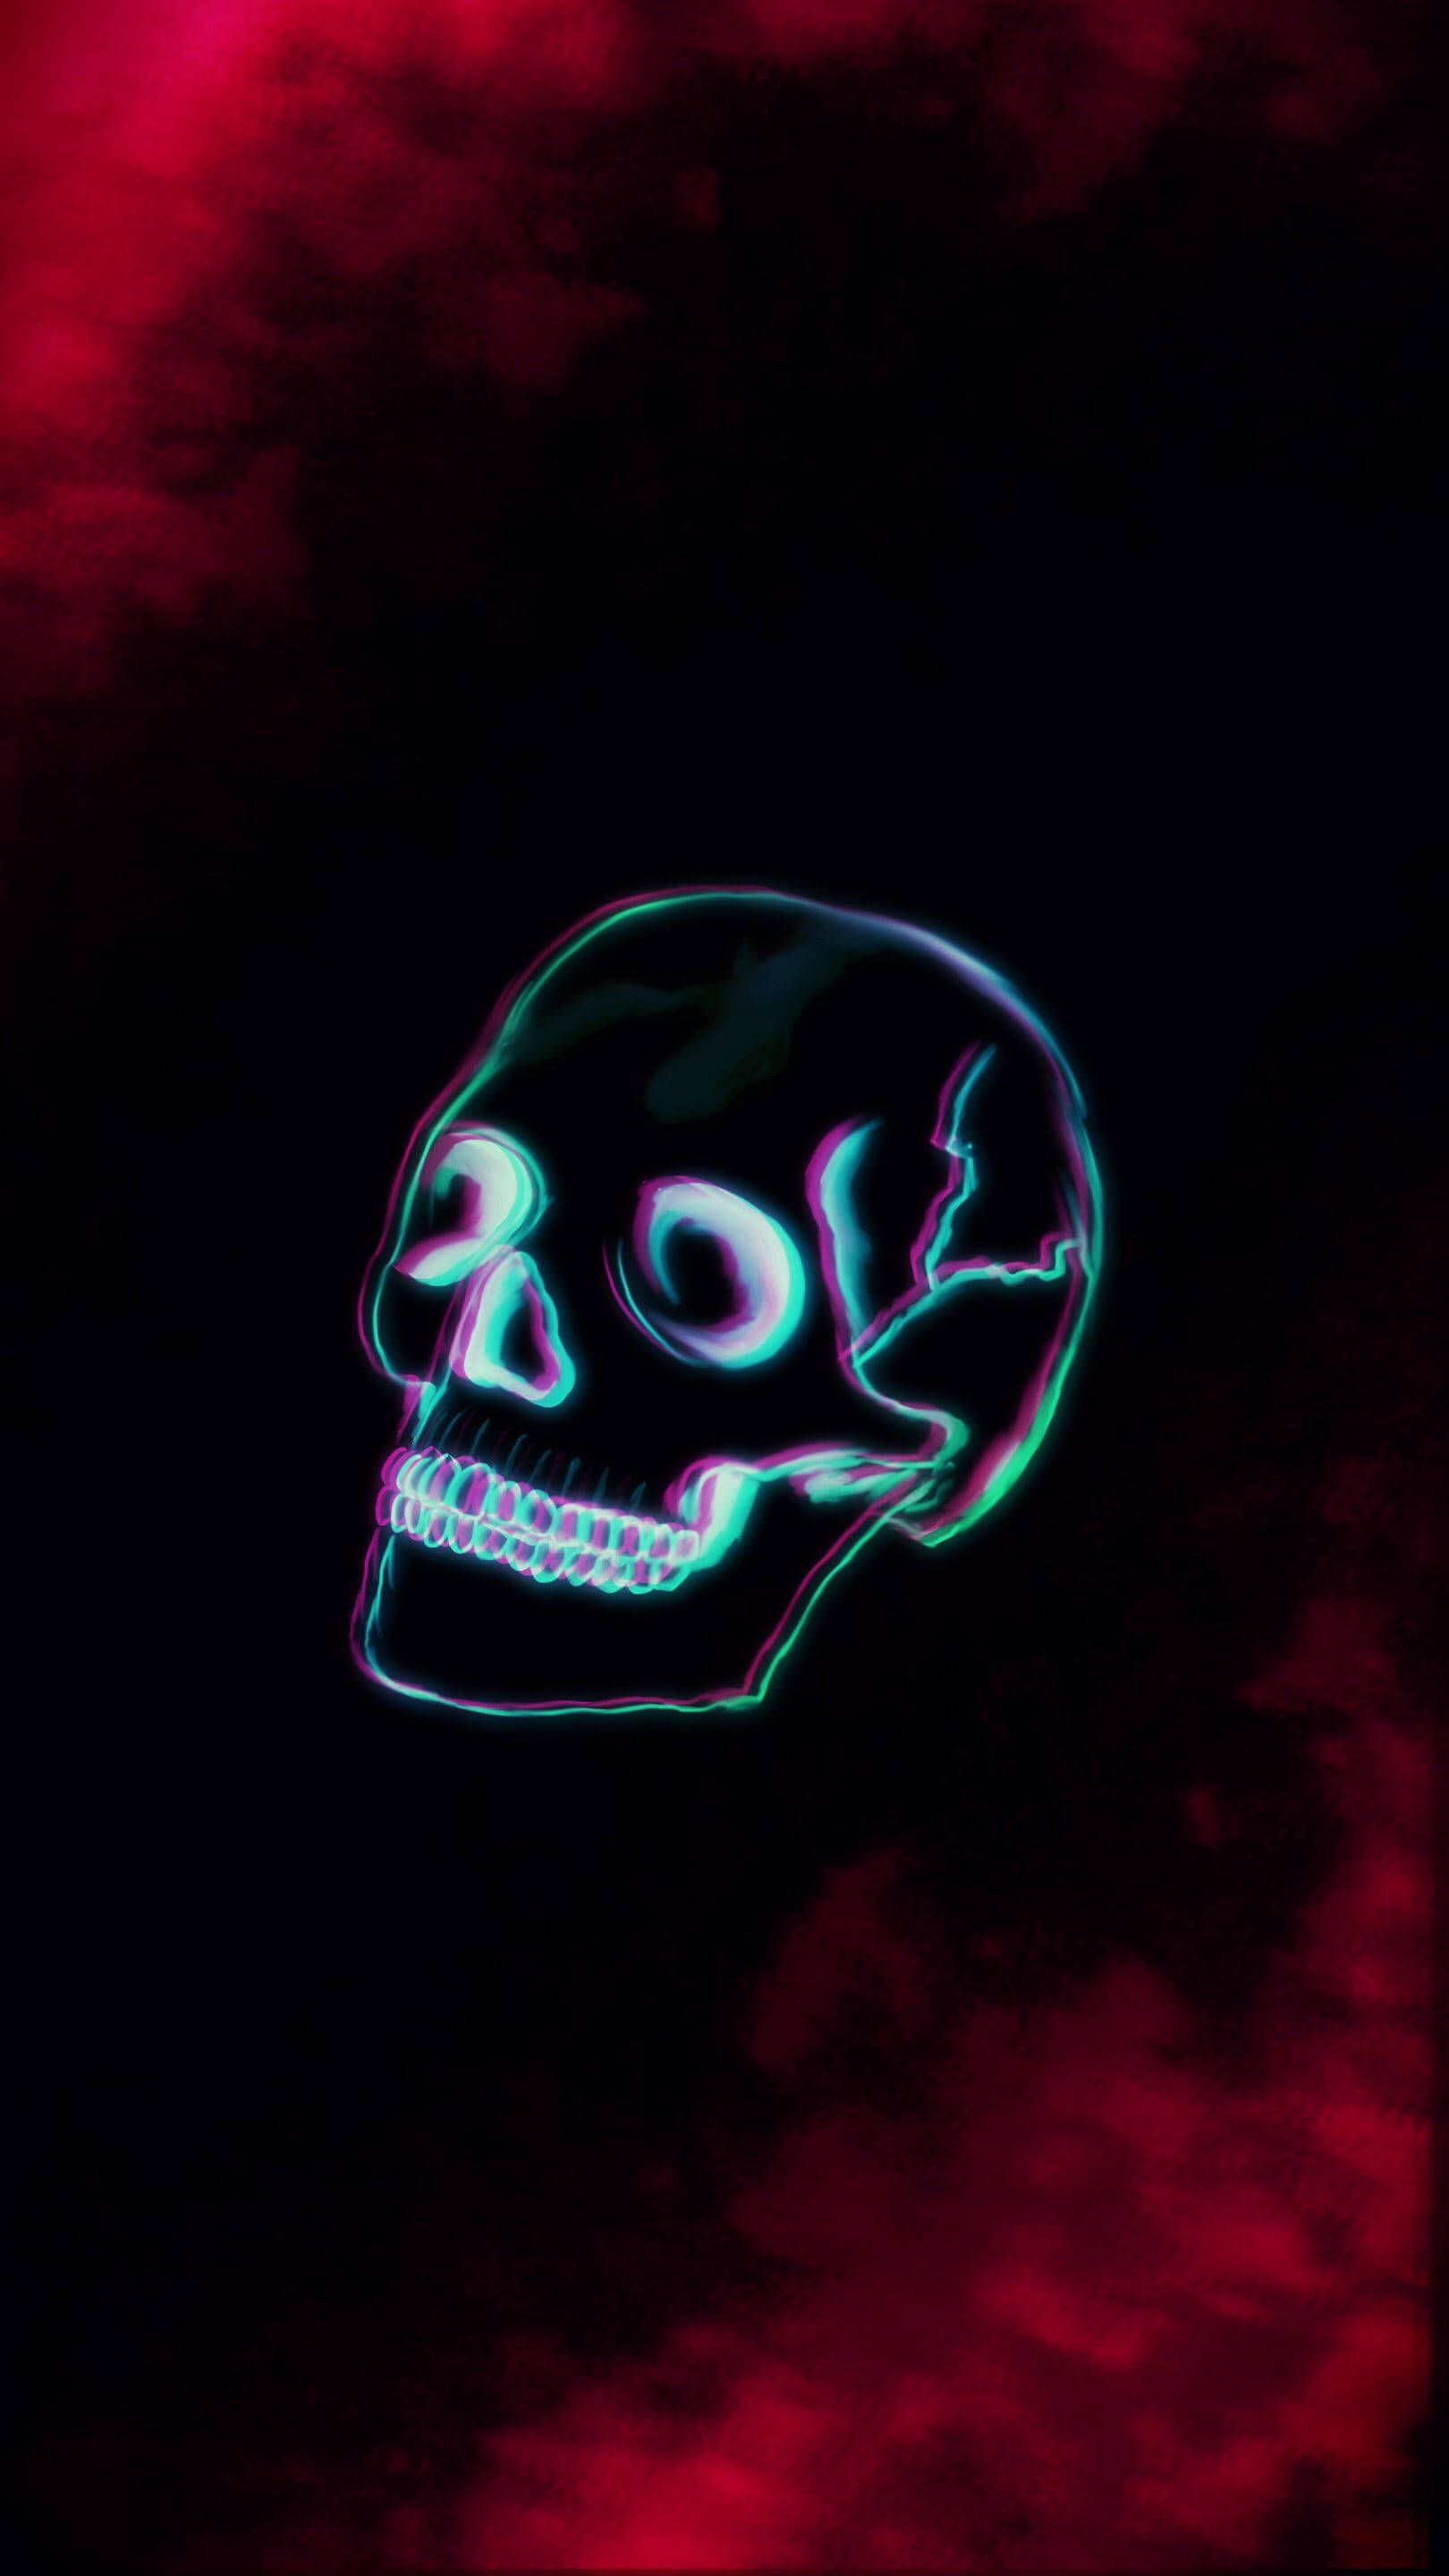 A skull with glowing eyes on black background - Skull